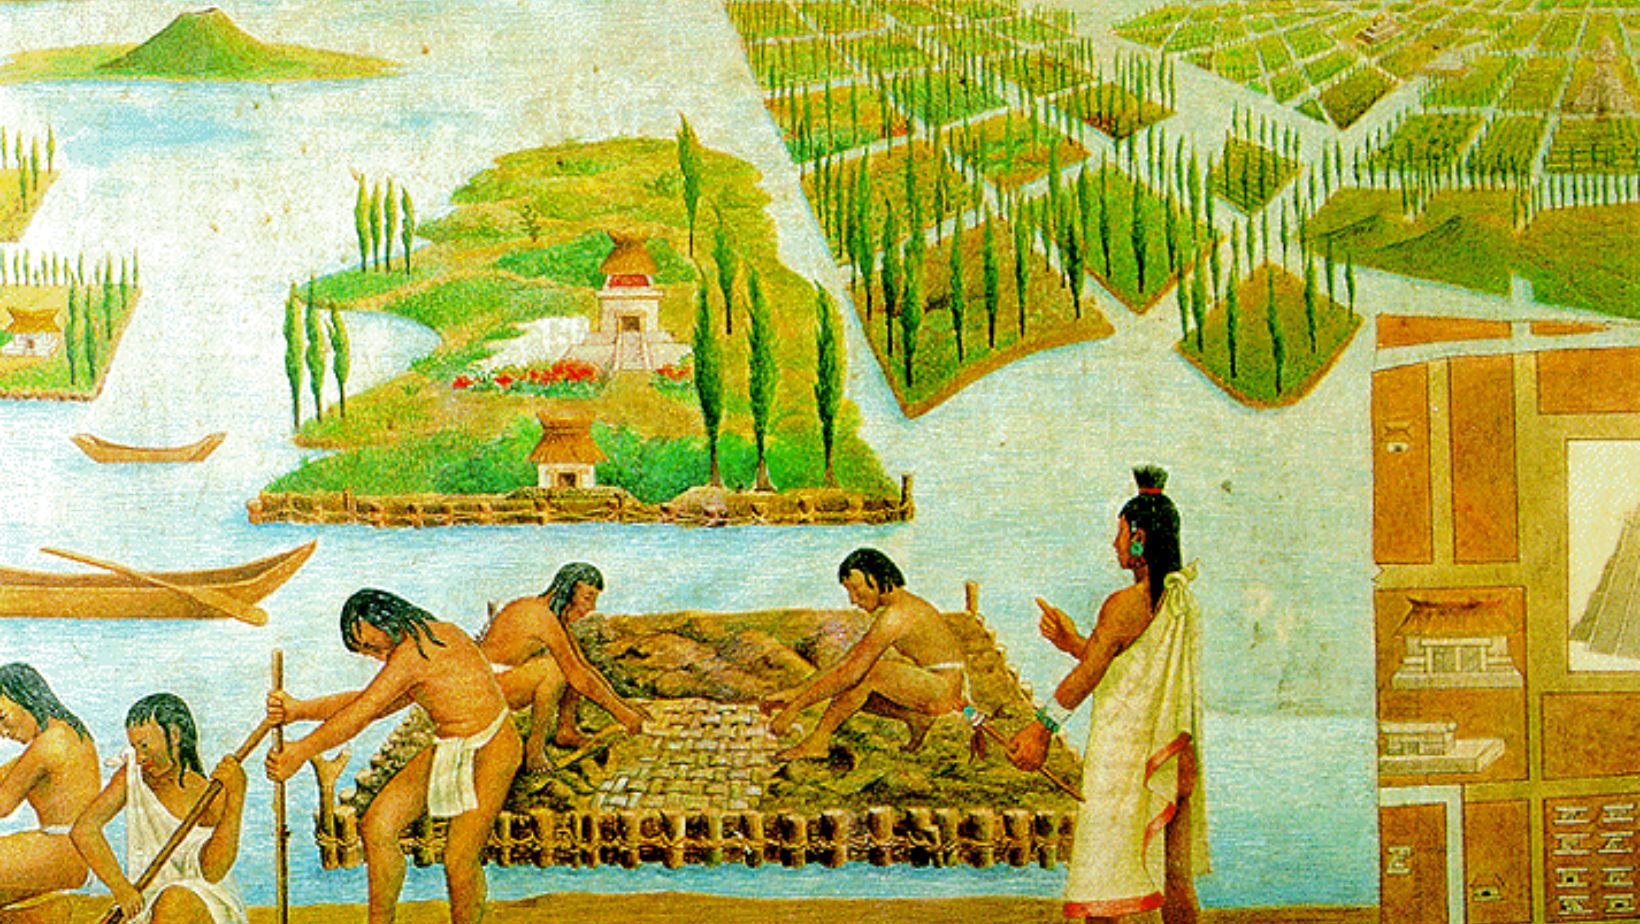 Aztec technology and inventions